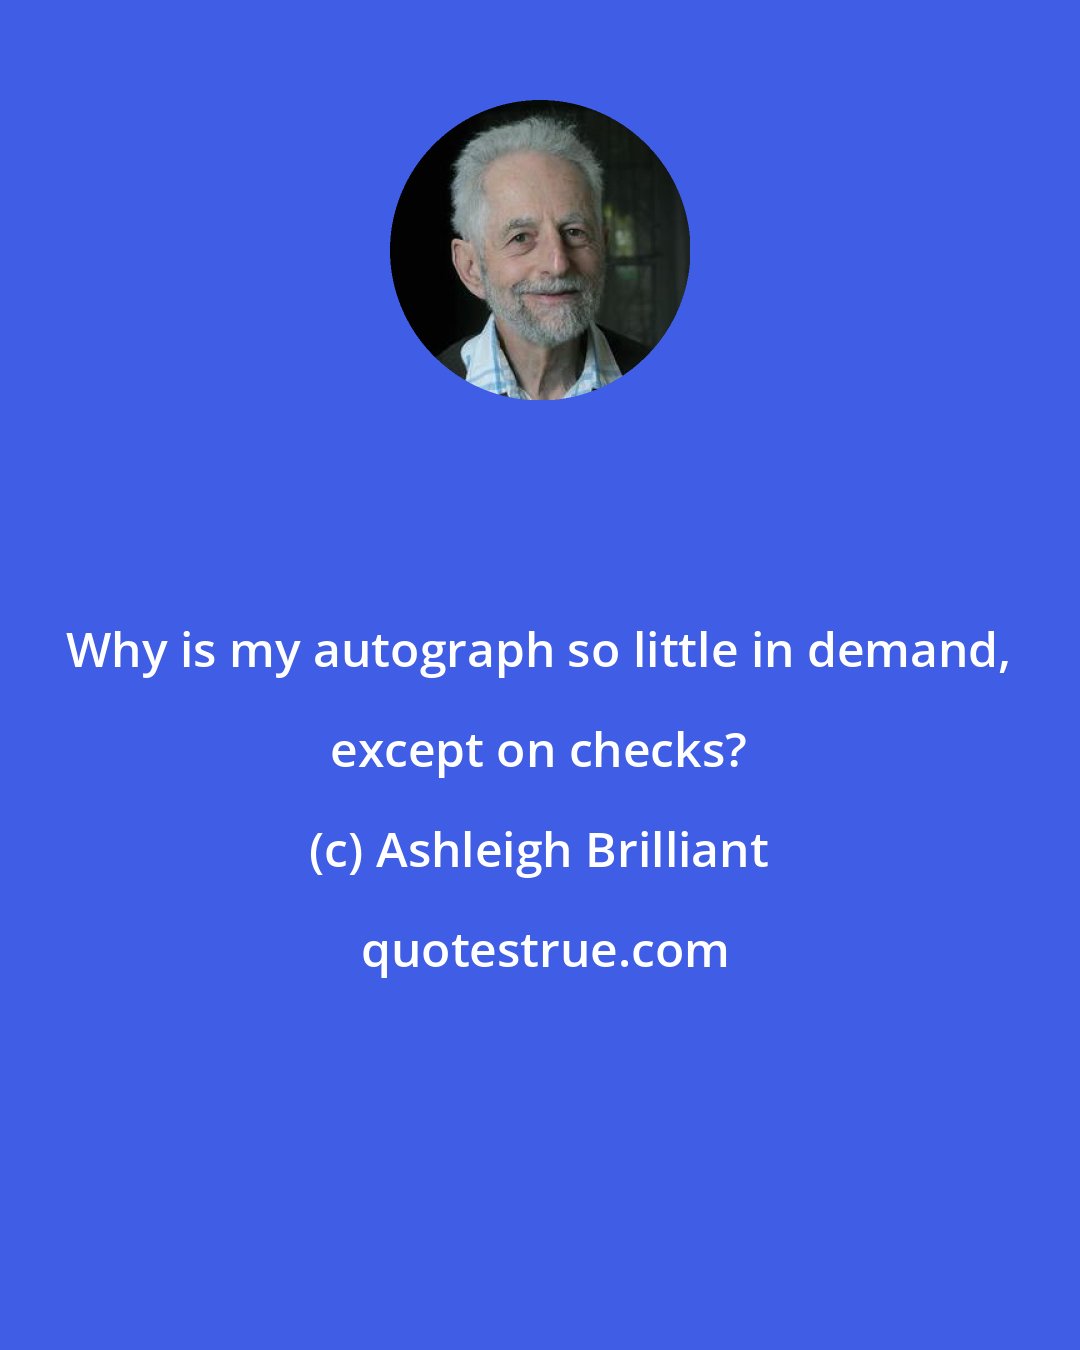 Ashleigh Brilliant: Why is my autograph so little in demand, except on checks?